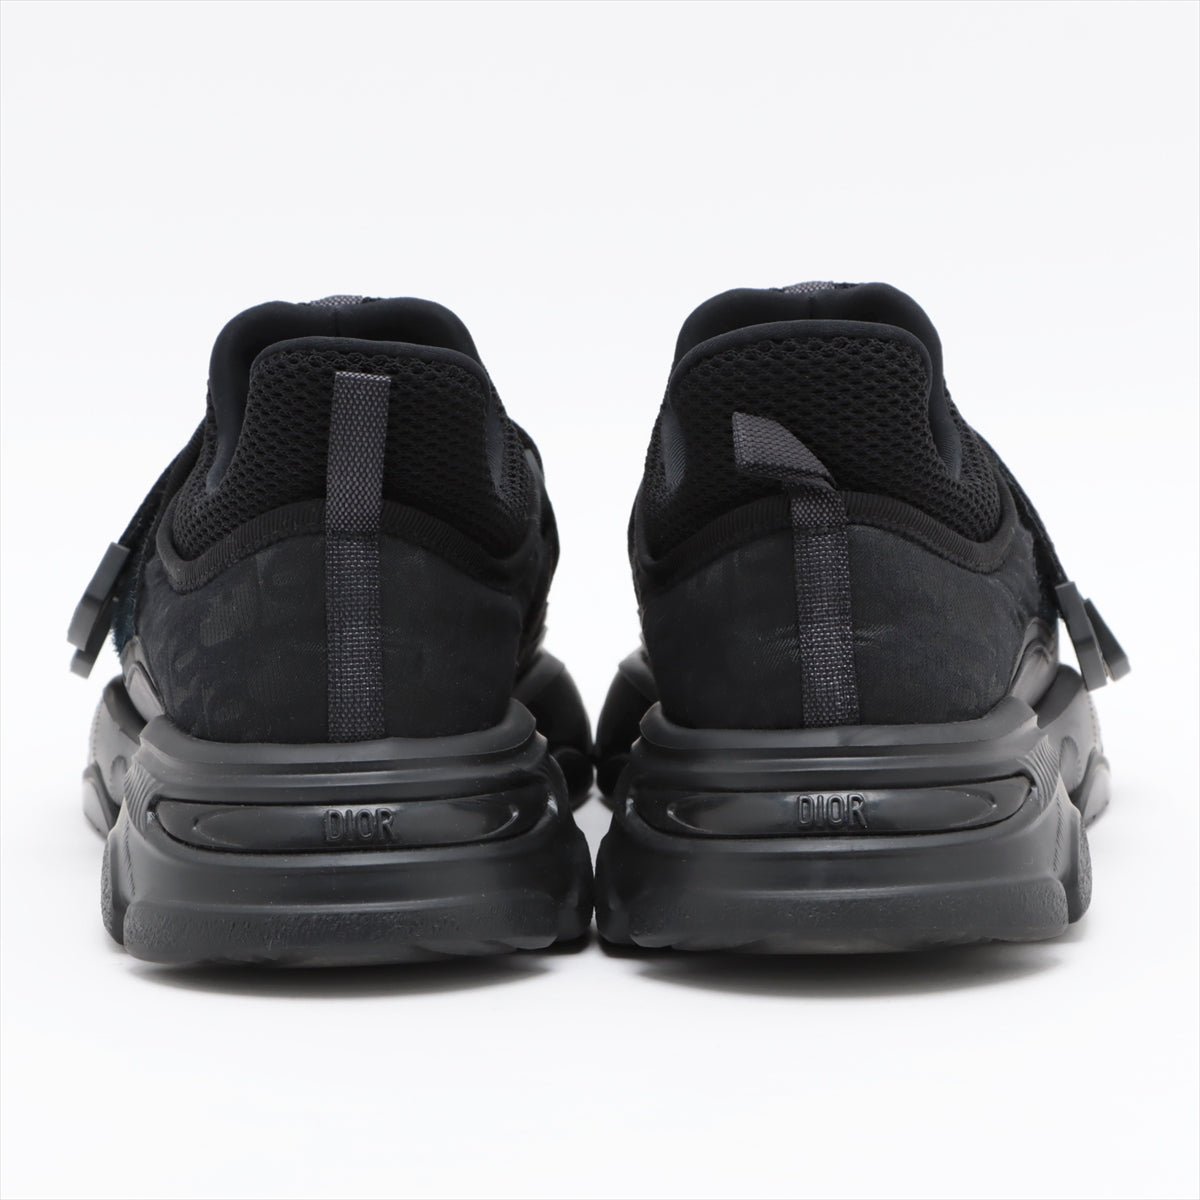 Christian Dior Oblique Leather x fabric Sneakers 37 1/2 Ladies' Black D-WANDER box There is a bag